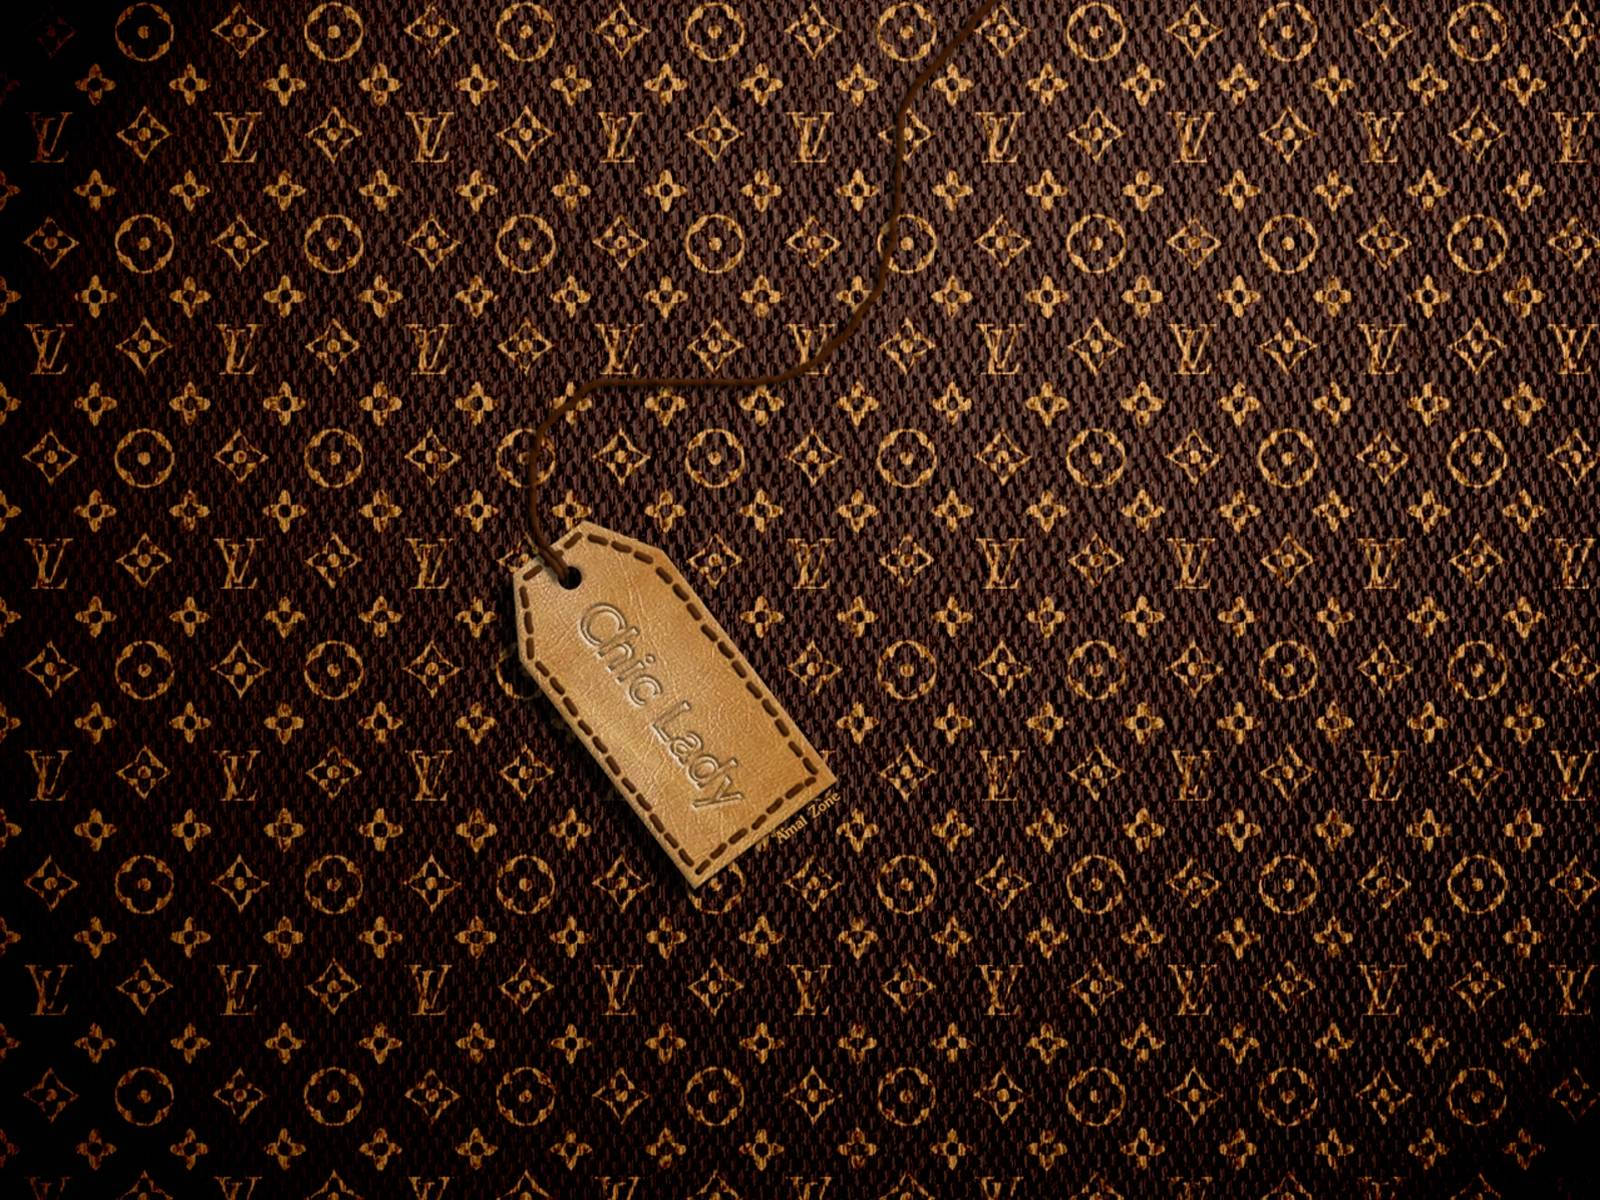 Vintage Louis Vuitton With Leather Tag Background